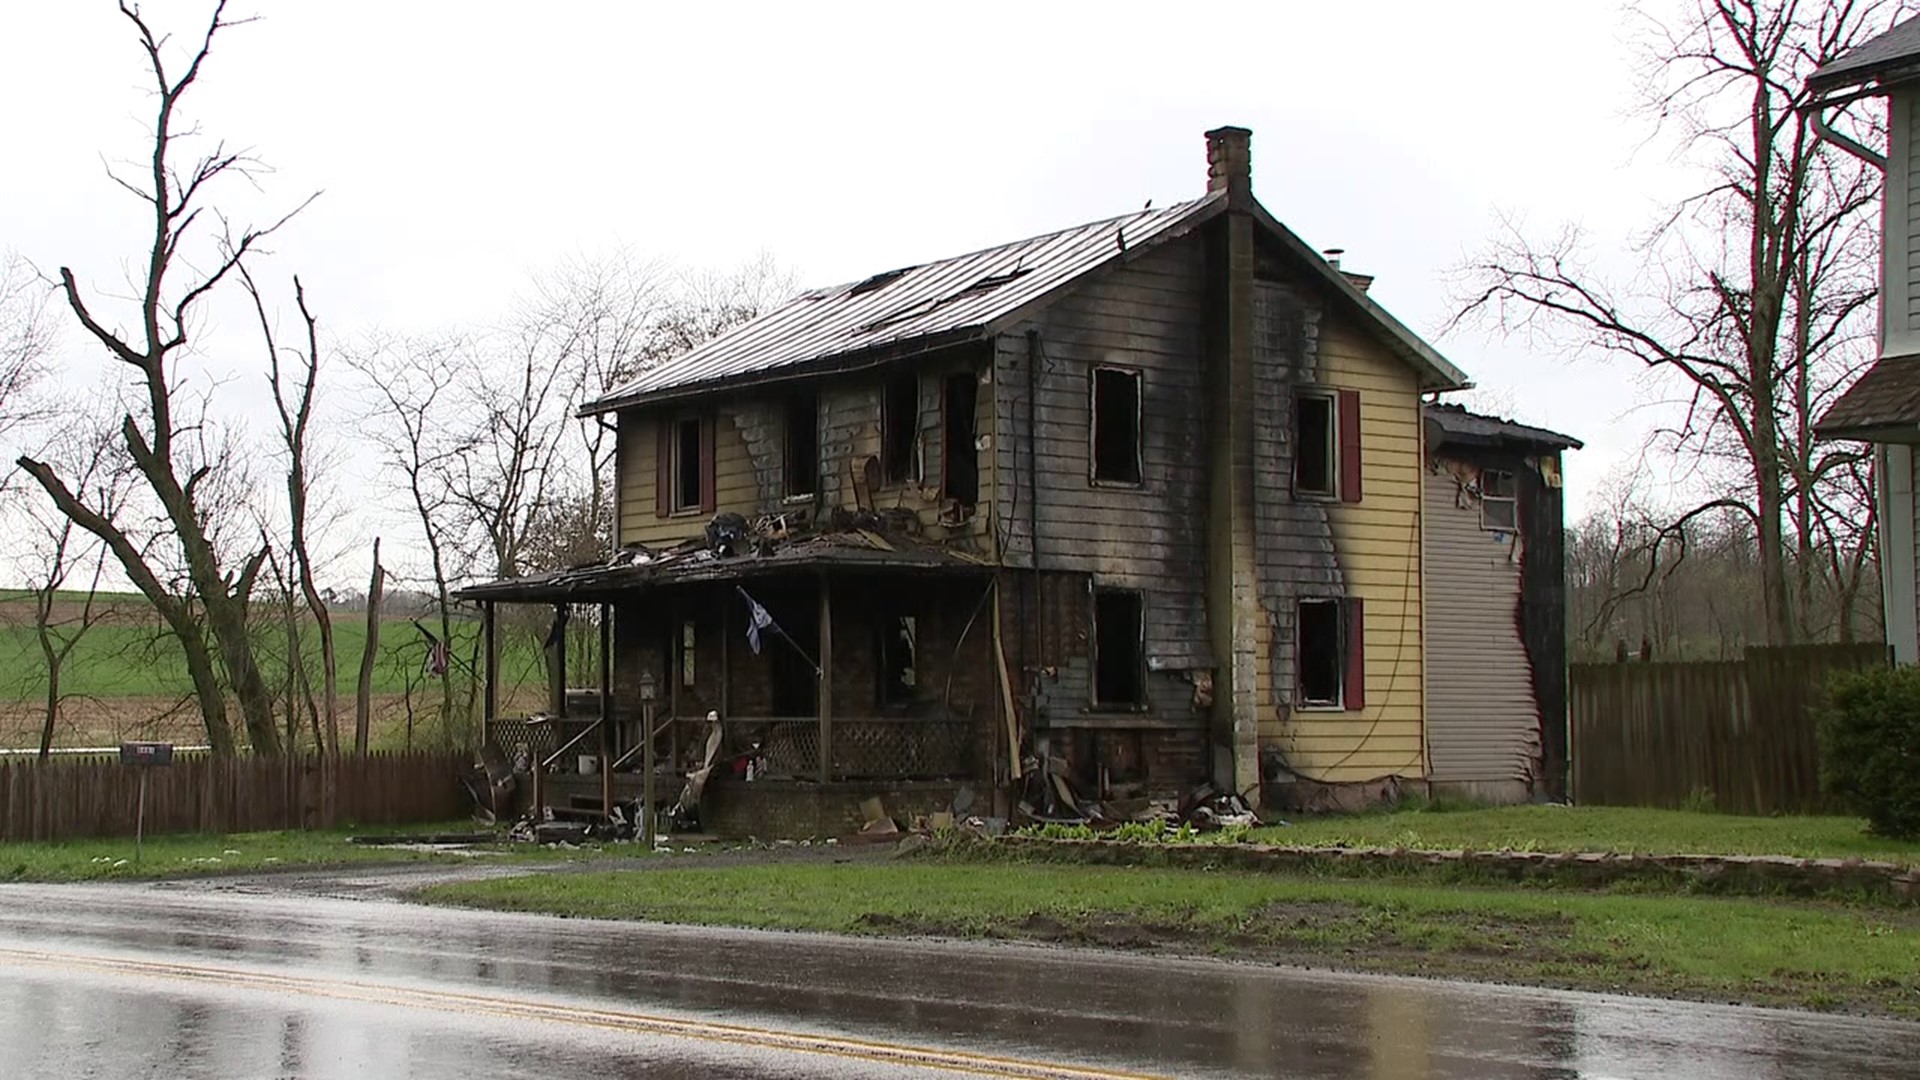 Local businesses are collecting items for a family after a deadly fire in Union County.